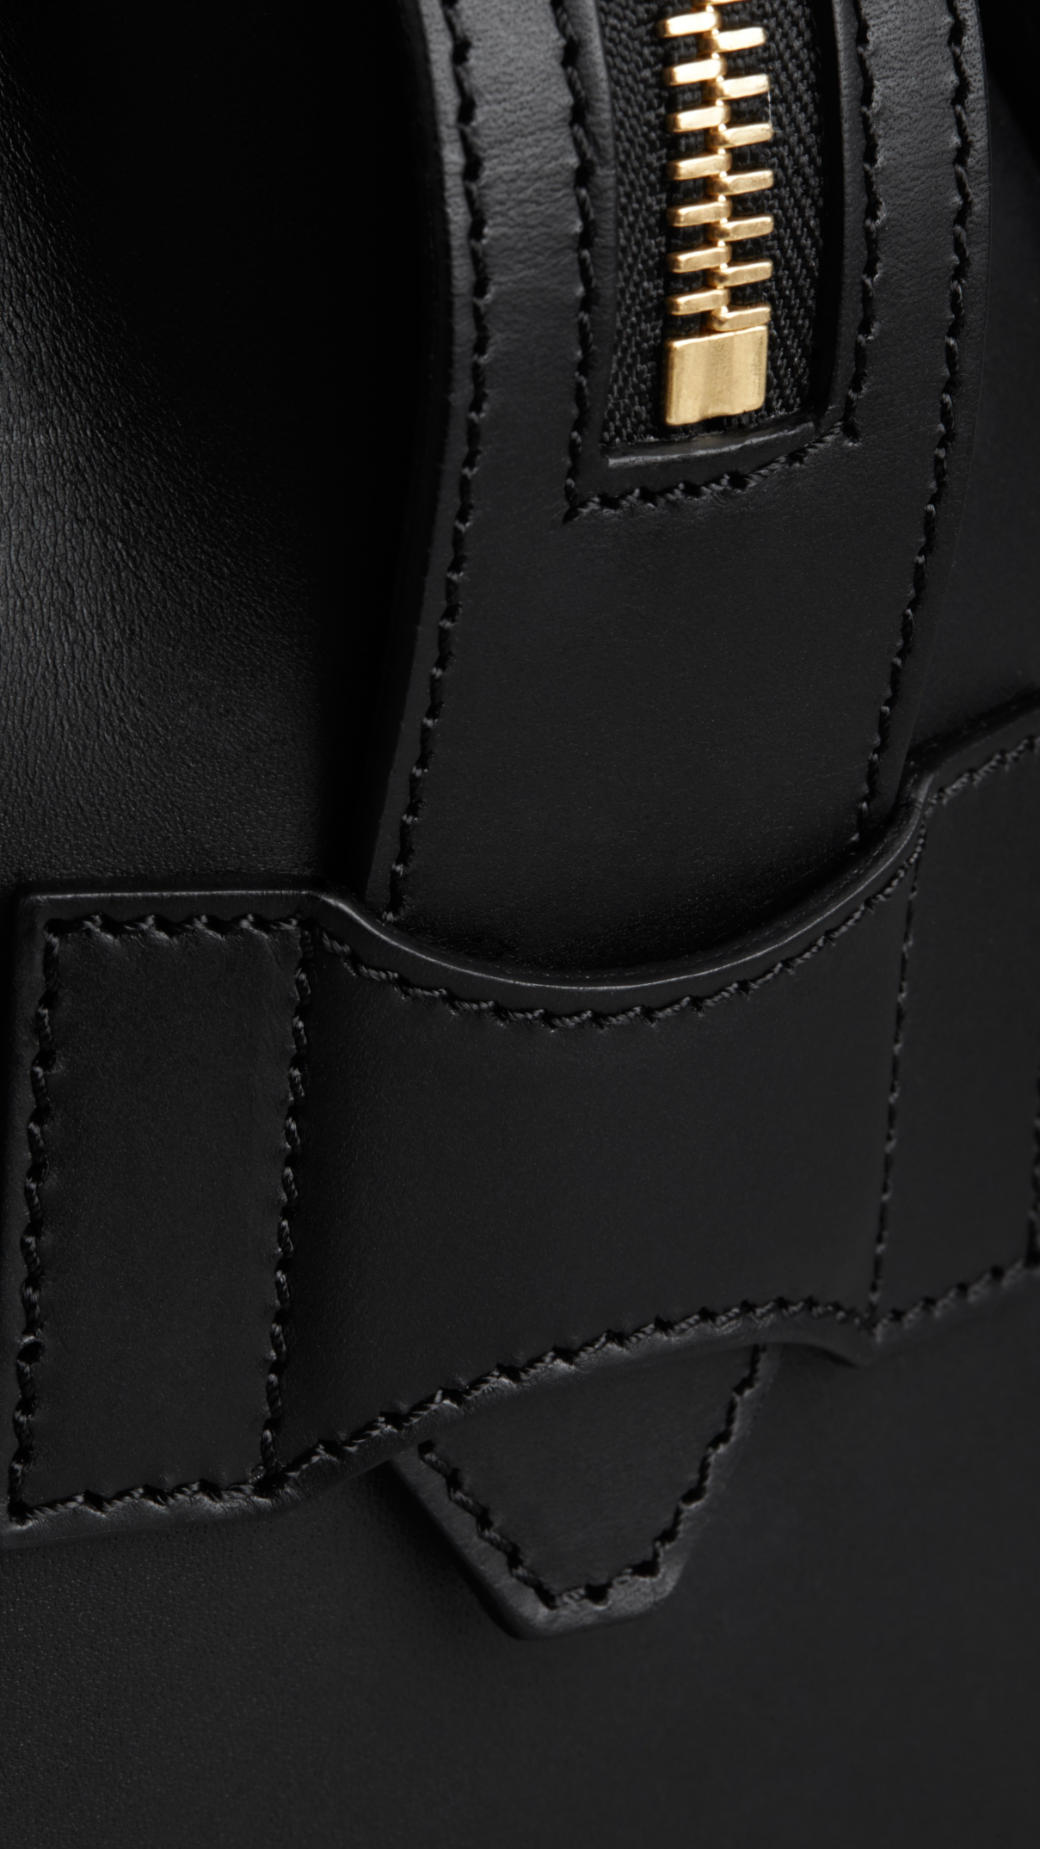 Lyst - Burberry Sartorial Leather Bowling Bag in Black